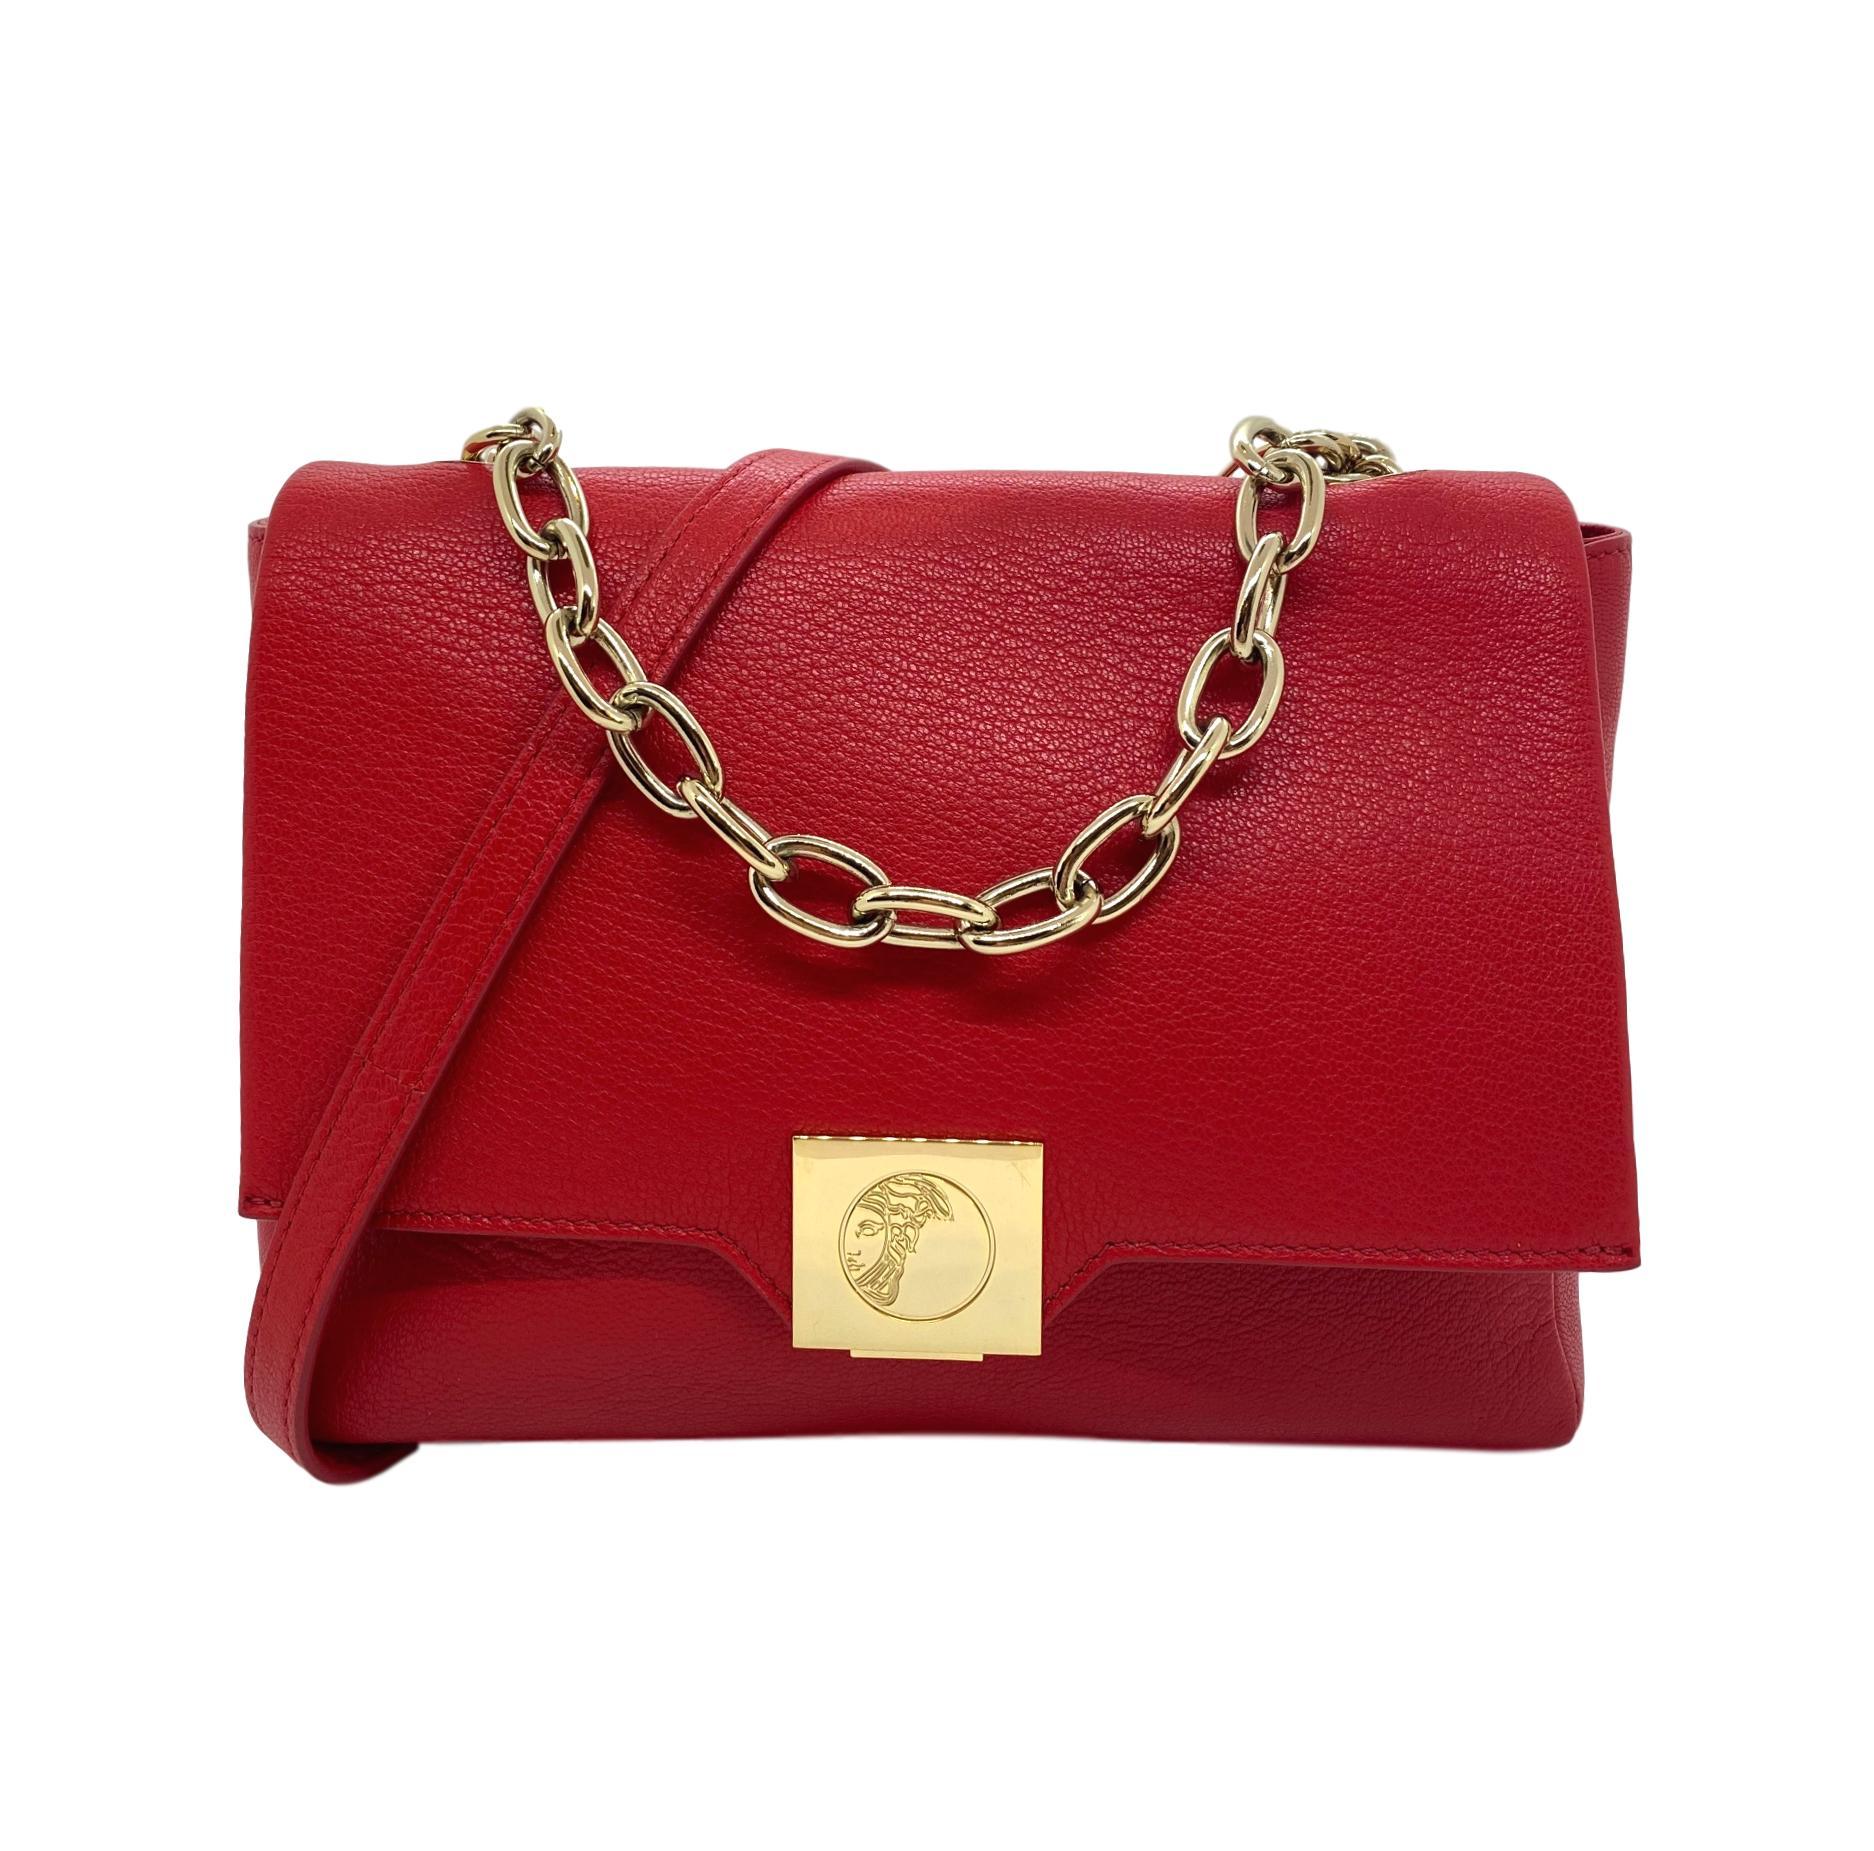 Versace Collection Red Fold-Over Leather Crossbody Bag, circa 2019. Established in 1978, Gianni Versace became well known world wide for his use of bold colors and bright prints inspired and designed around ancient Greek mythology. This Versace